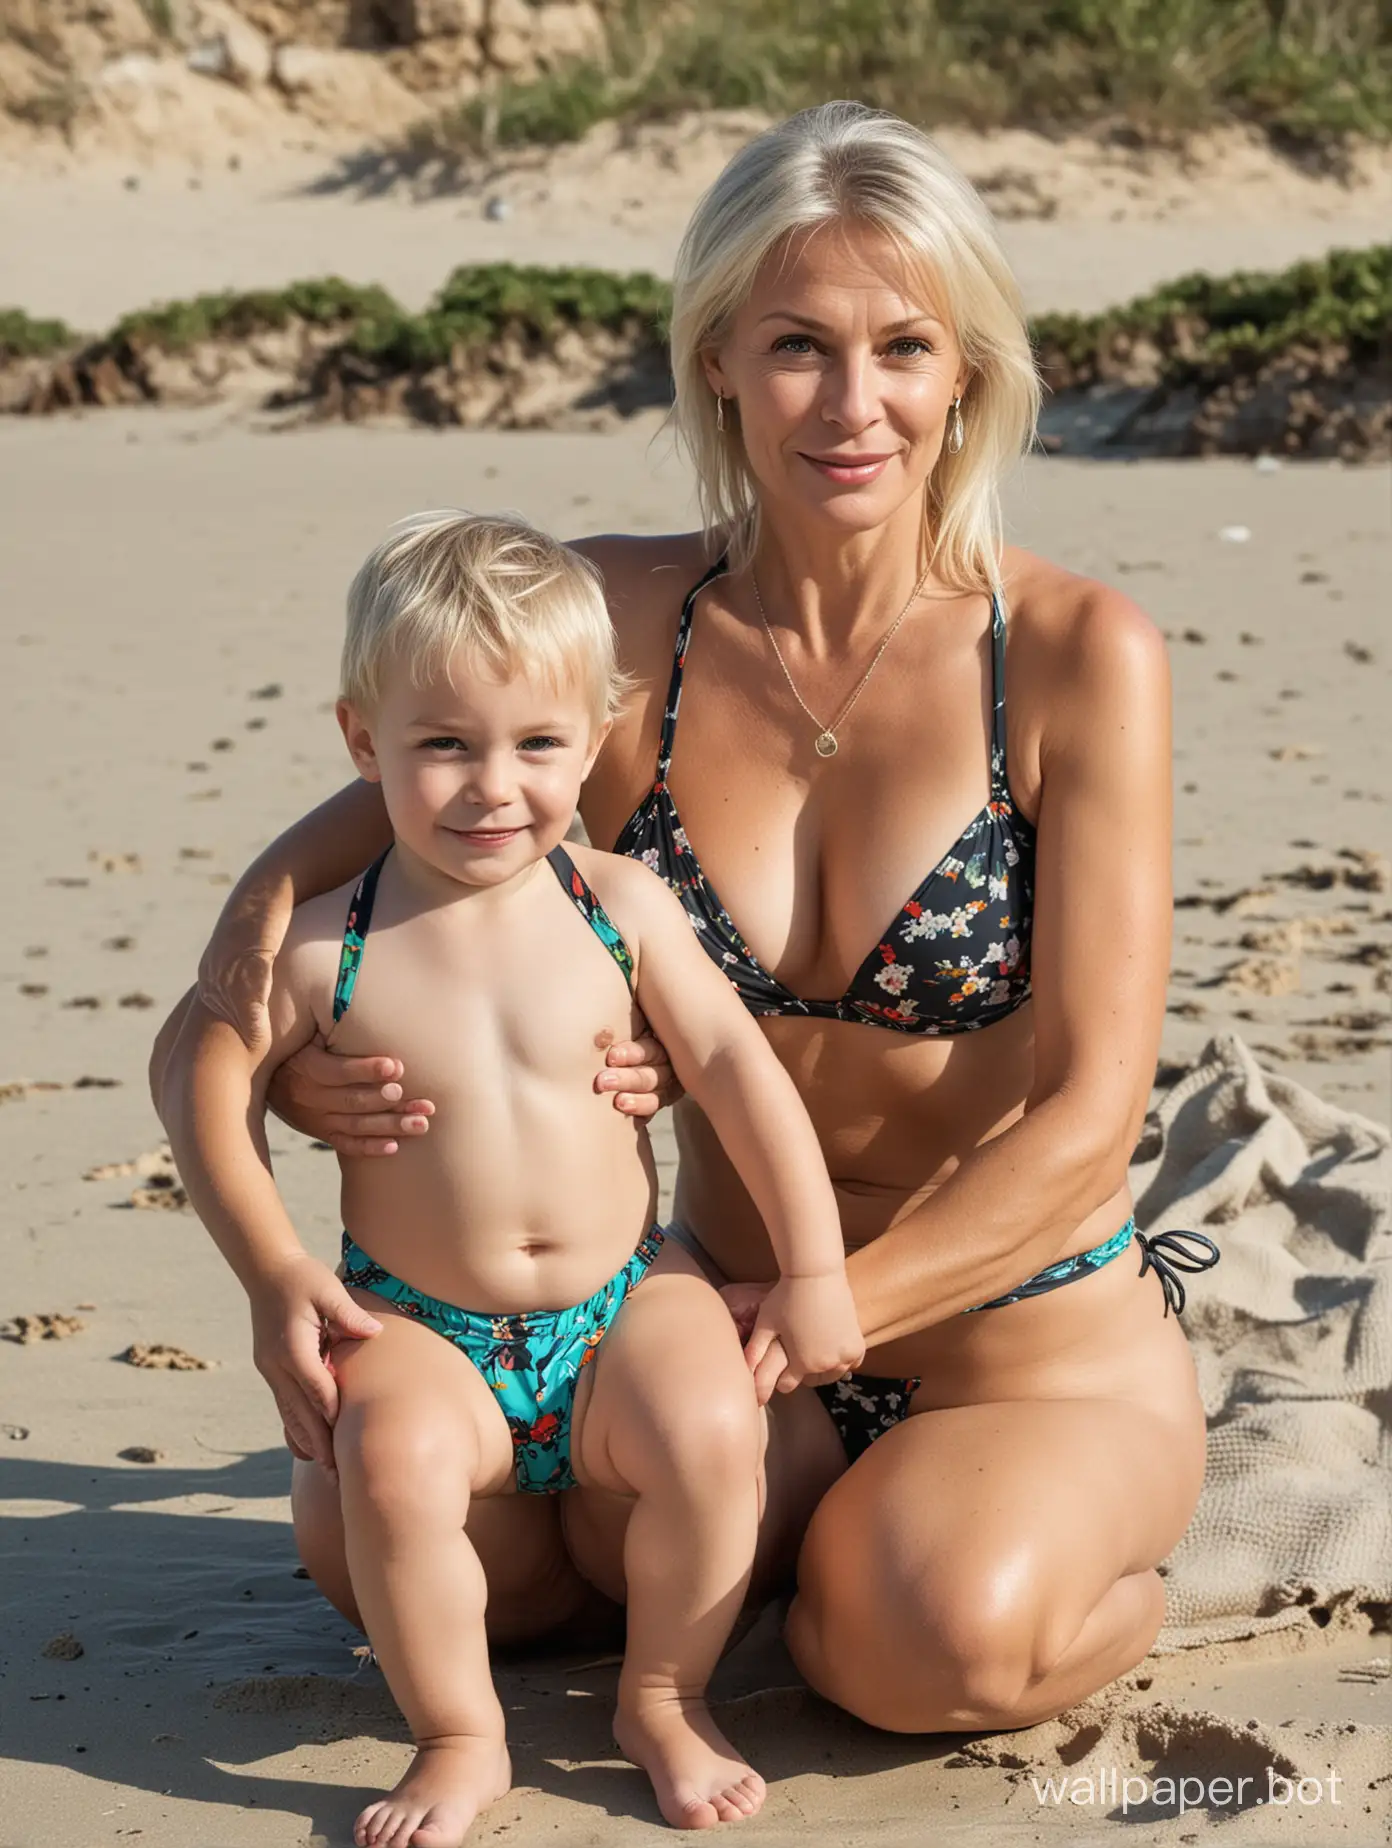 Russian woman, a blonde, 55 years old, sits with her little son on the beach in a thong bikini.